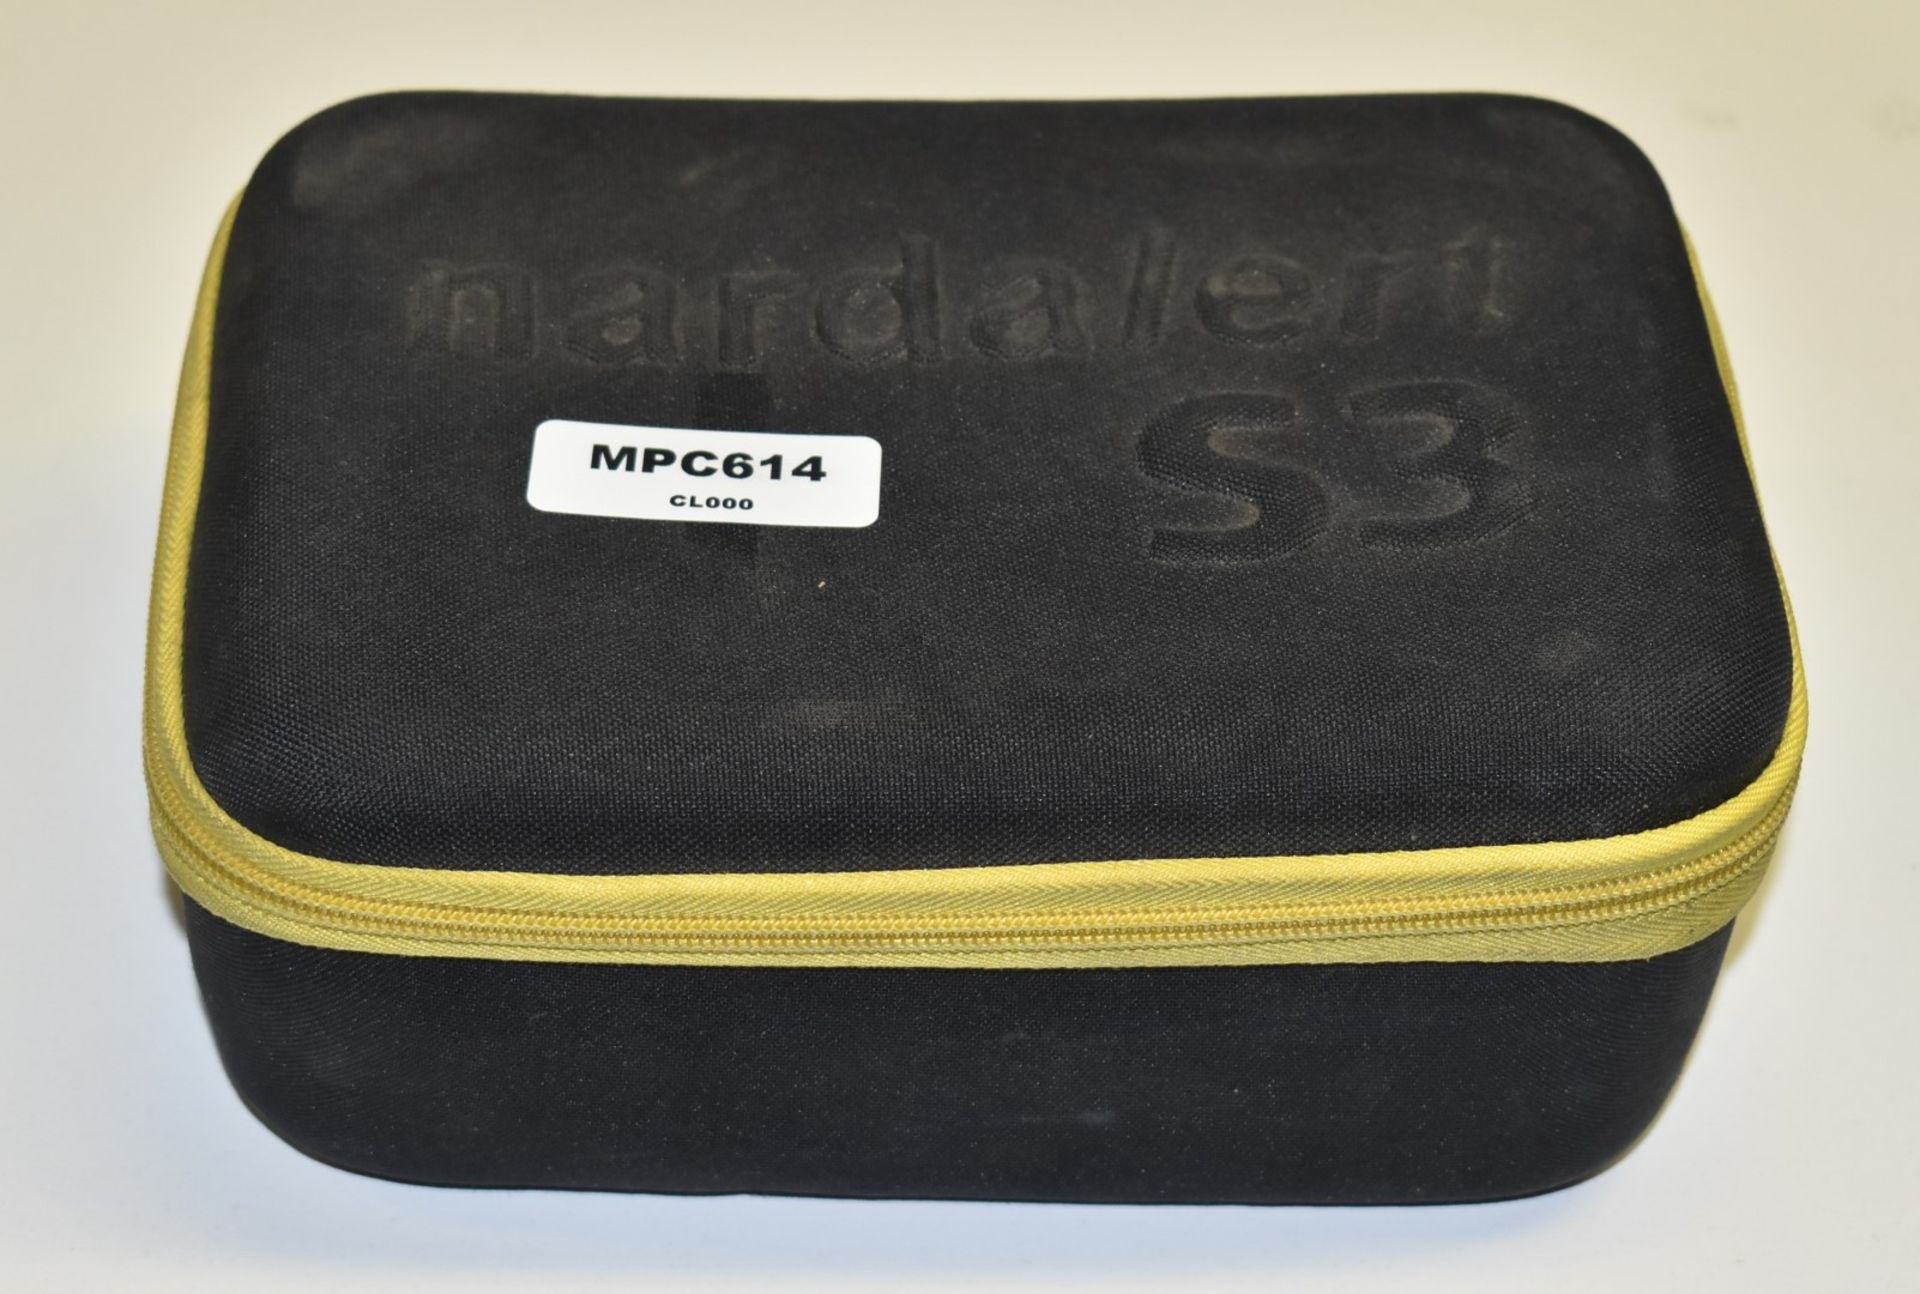 1 x Nardalert S3 None Ionizing Radiation Monitor - Model 2270/01 Mainframe - Includes Protection - Image 5 of 6